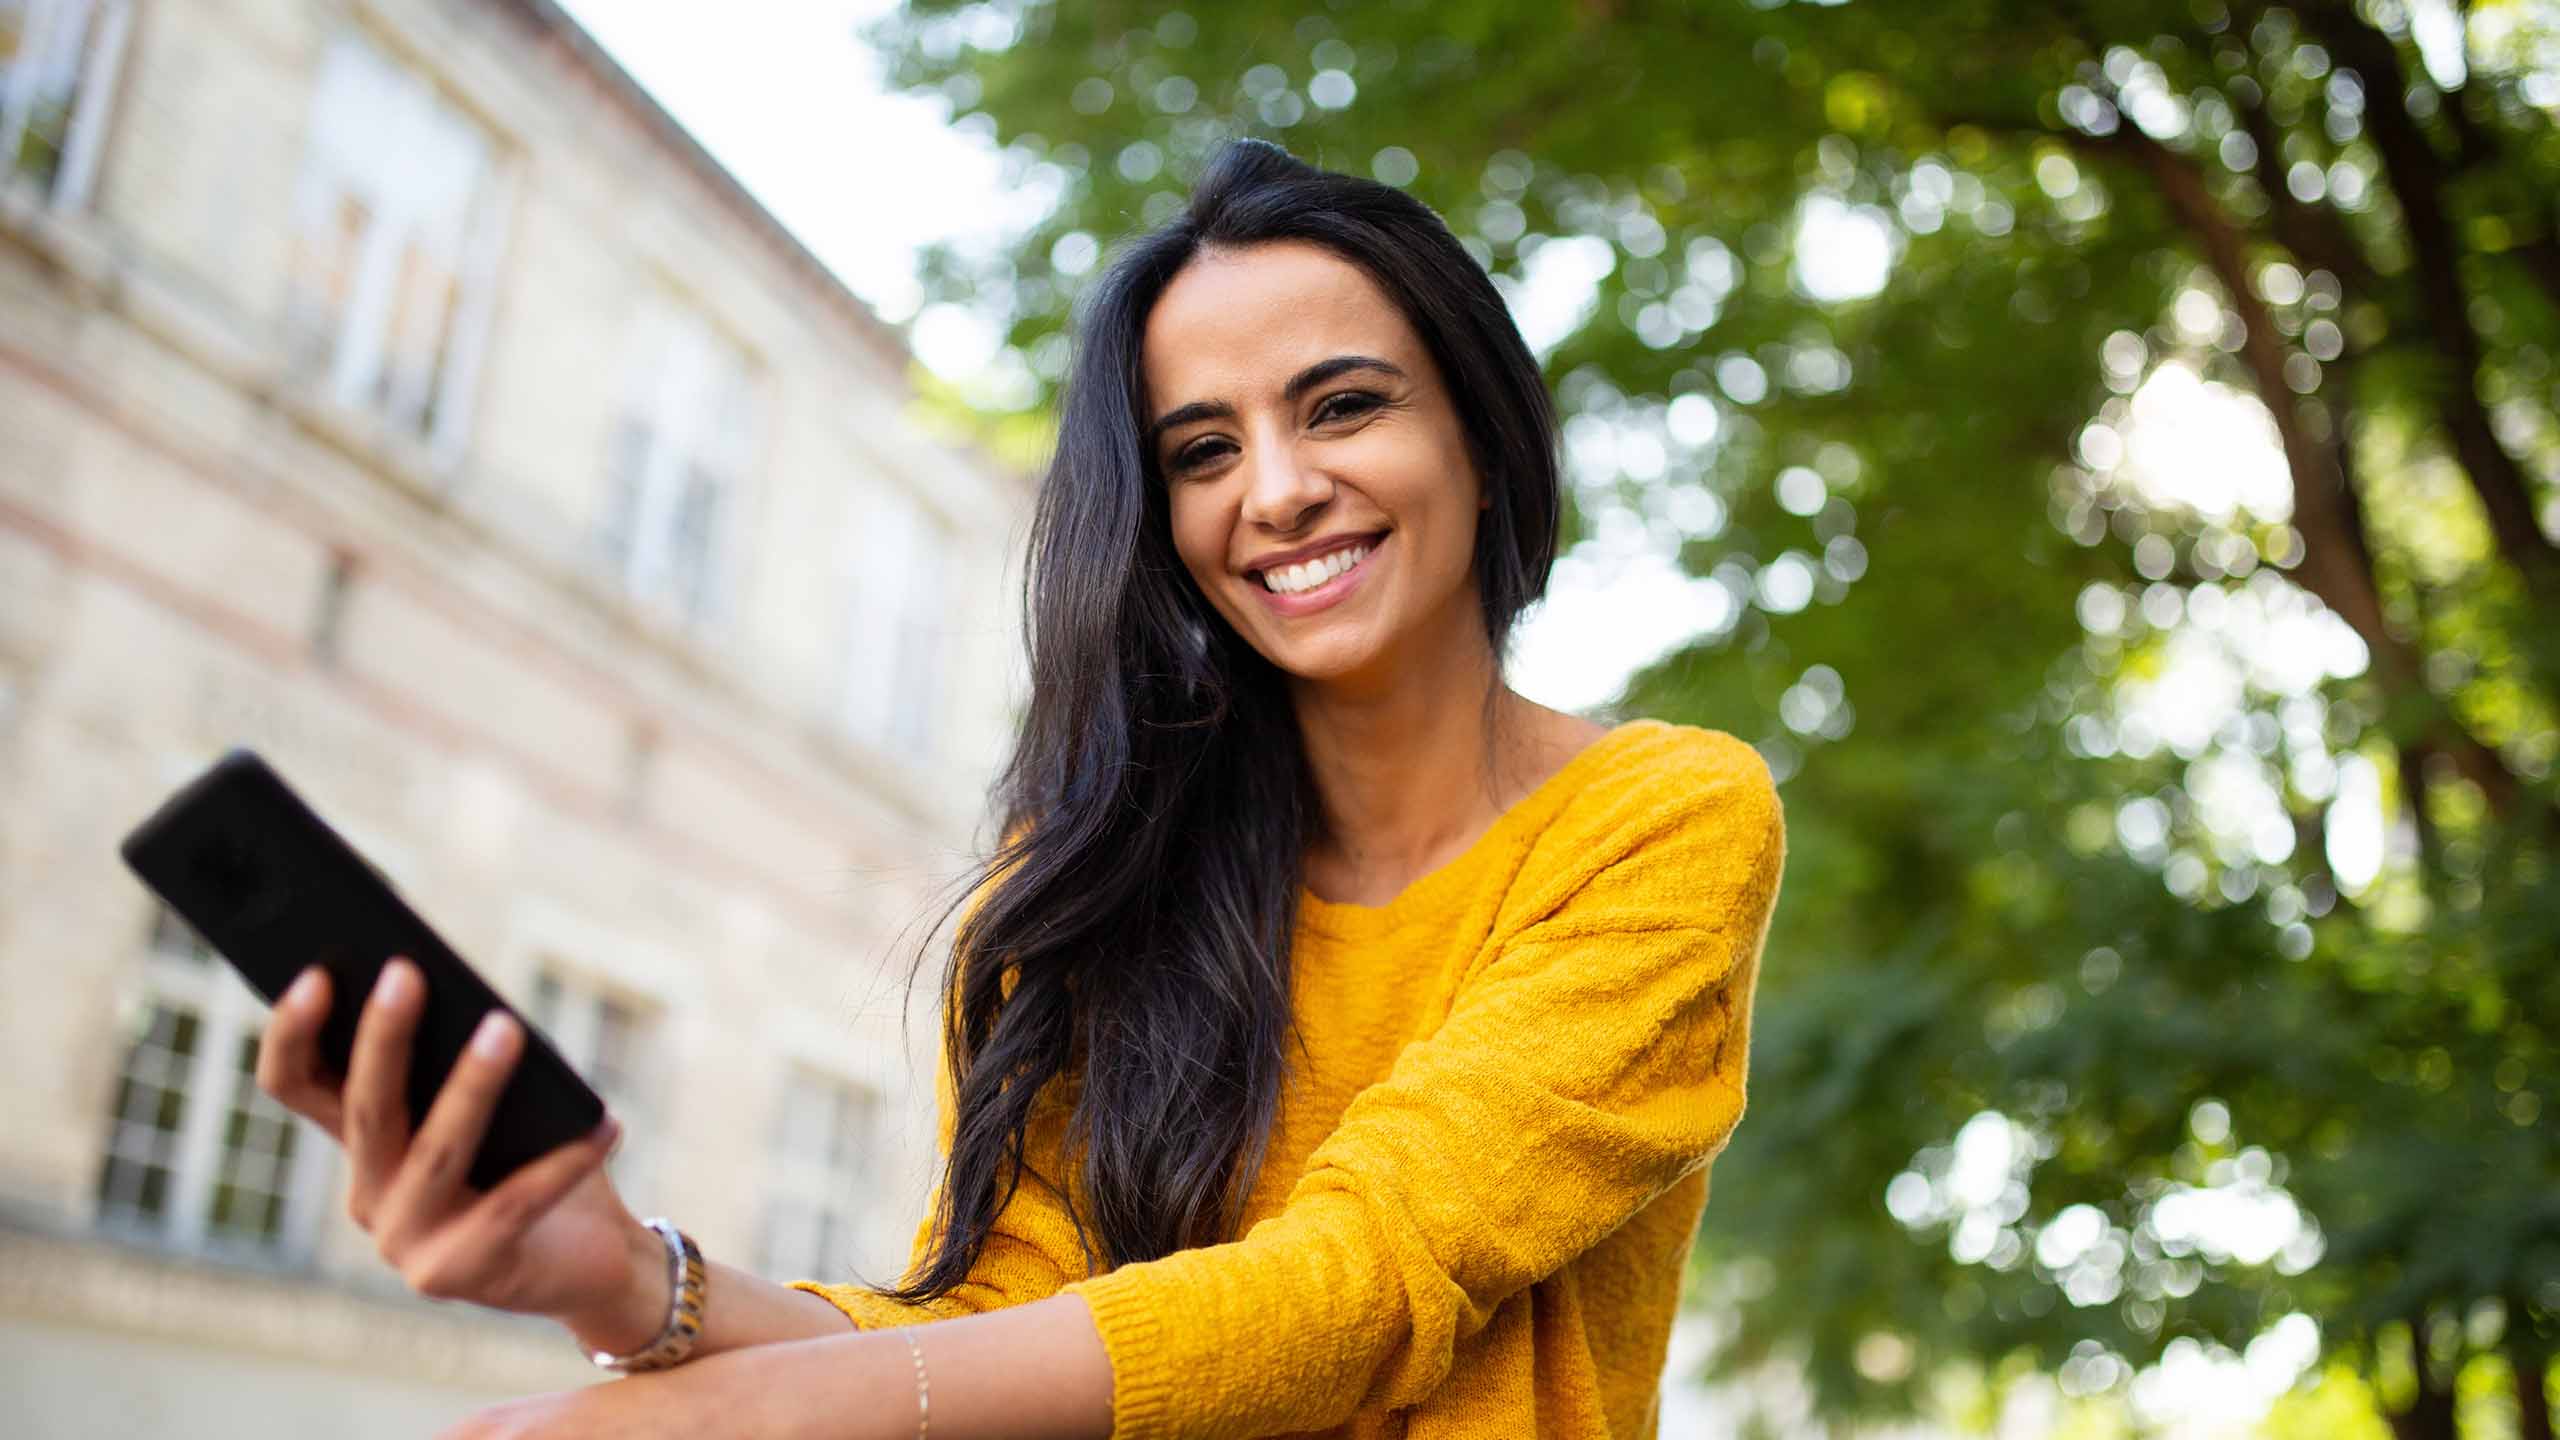 young woman smiling with mobile phone in hand outside